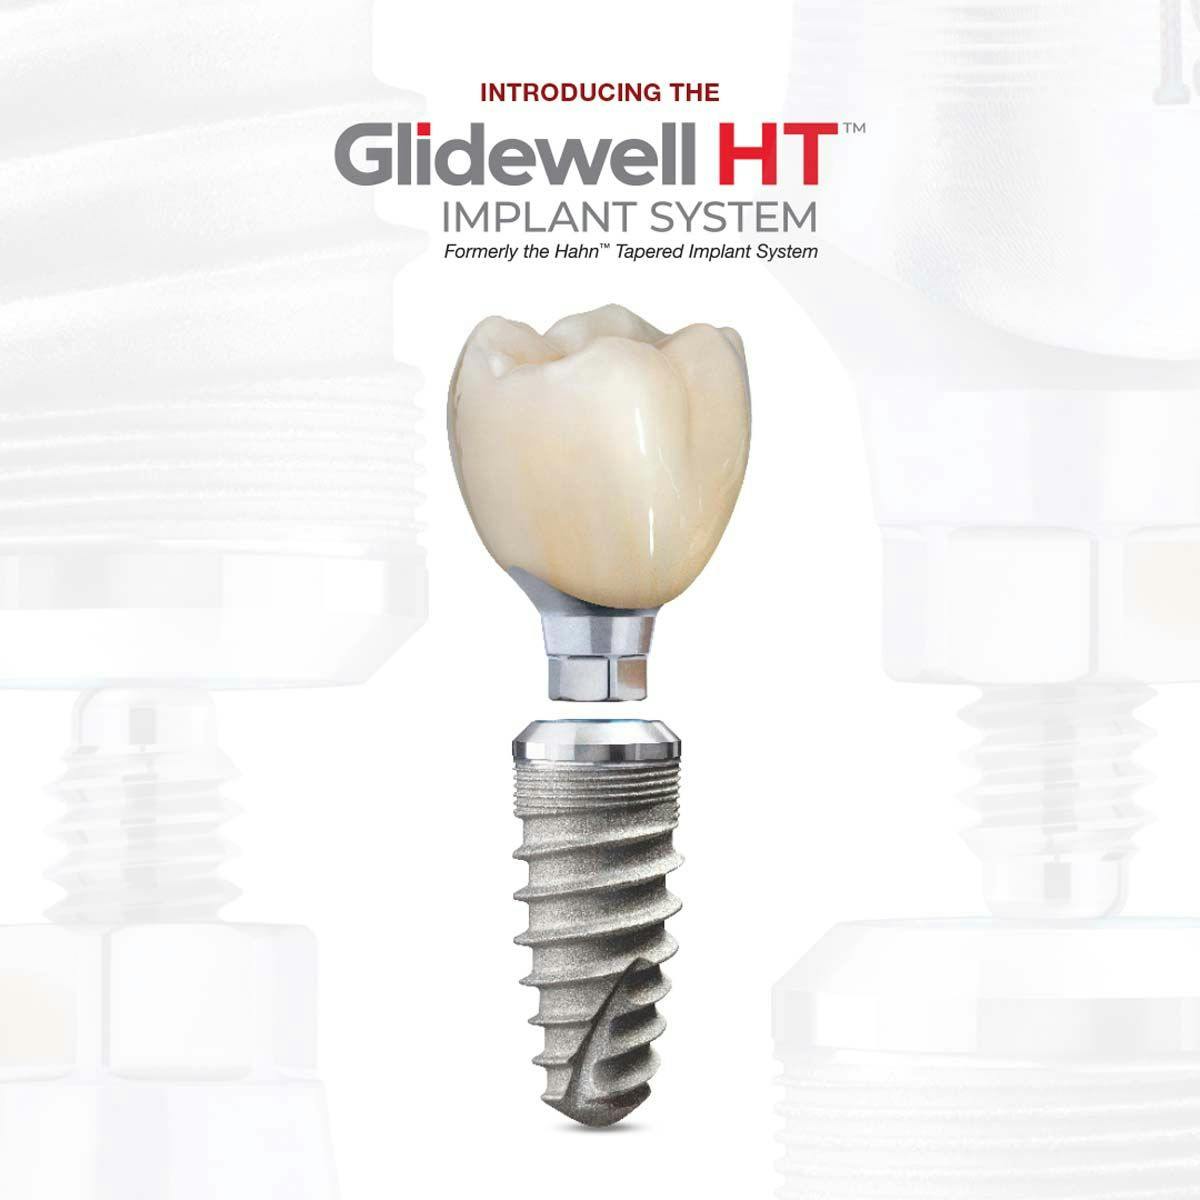 Glidewell Announces Rebranded Glidewell HT™ Implant System. Image credit: © Glidewell